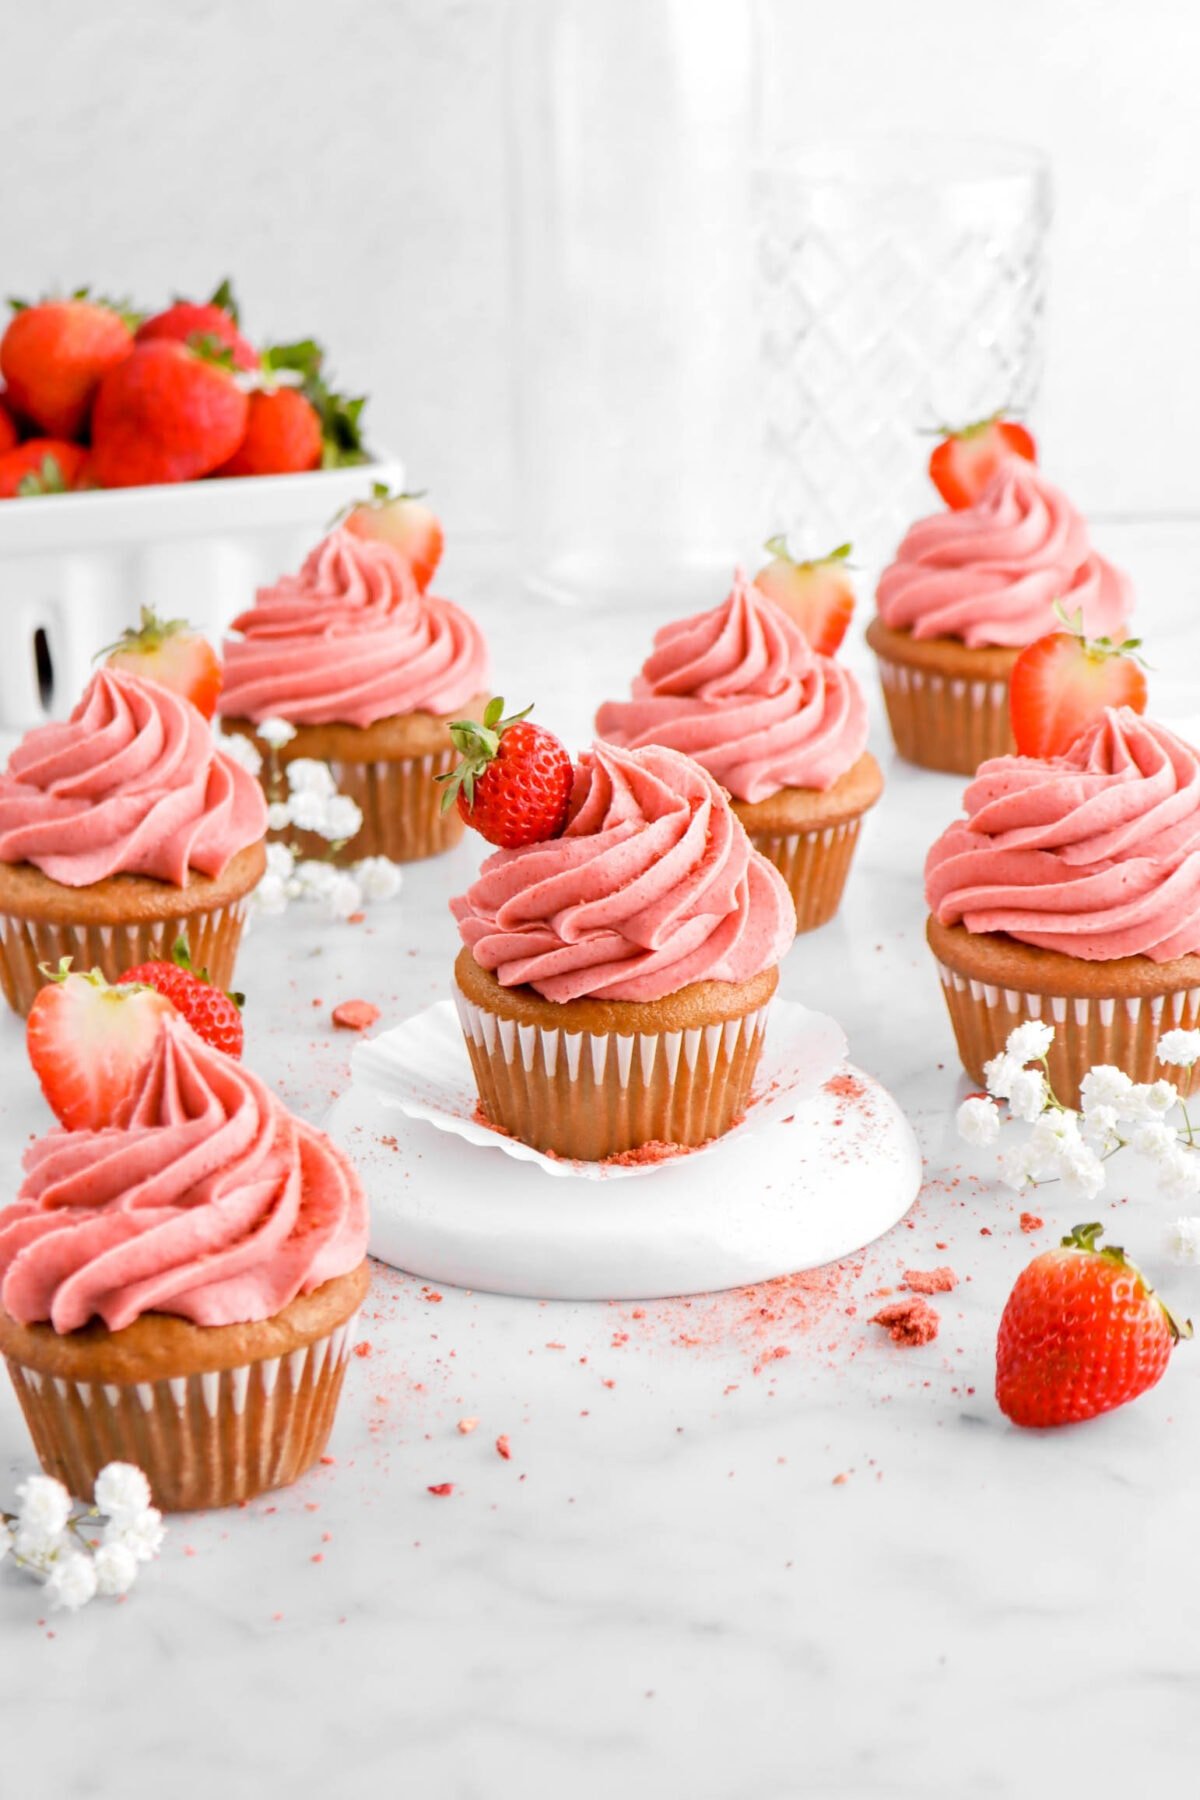 seven strawberry cupcakes on marble surface with one cupcake on upside down white plate, with fresh strawberries and white flowers around.